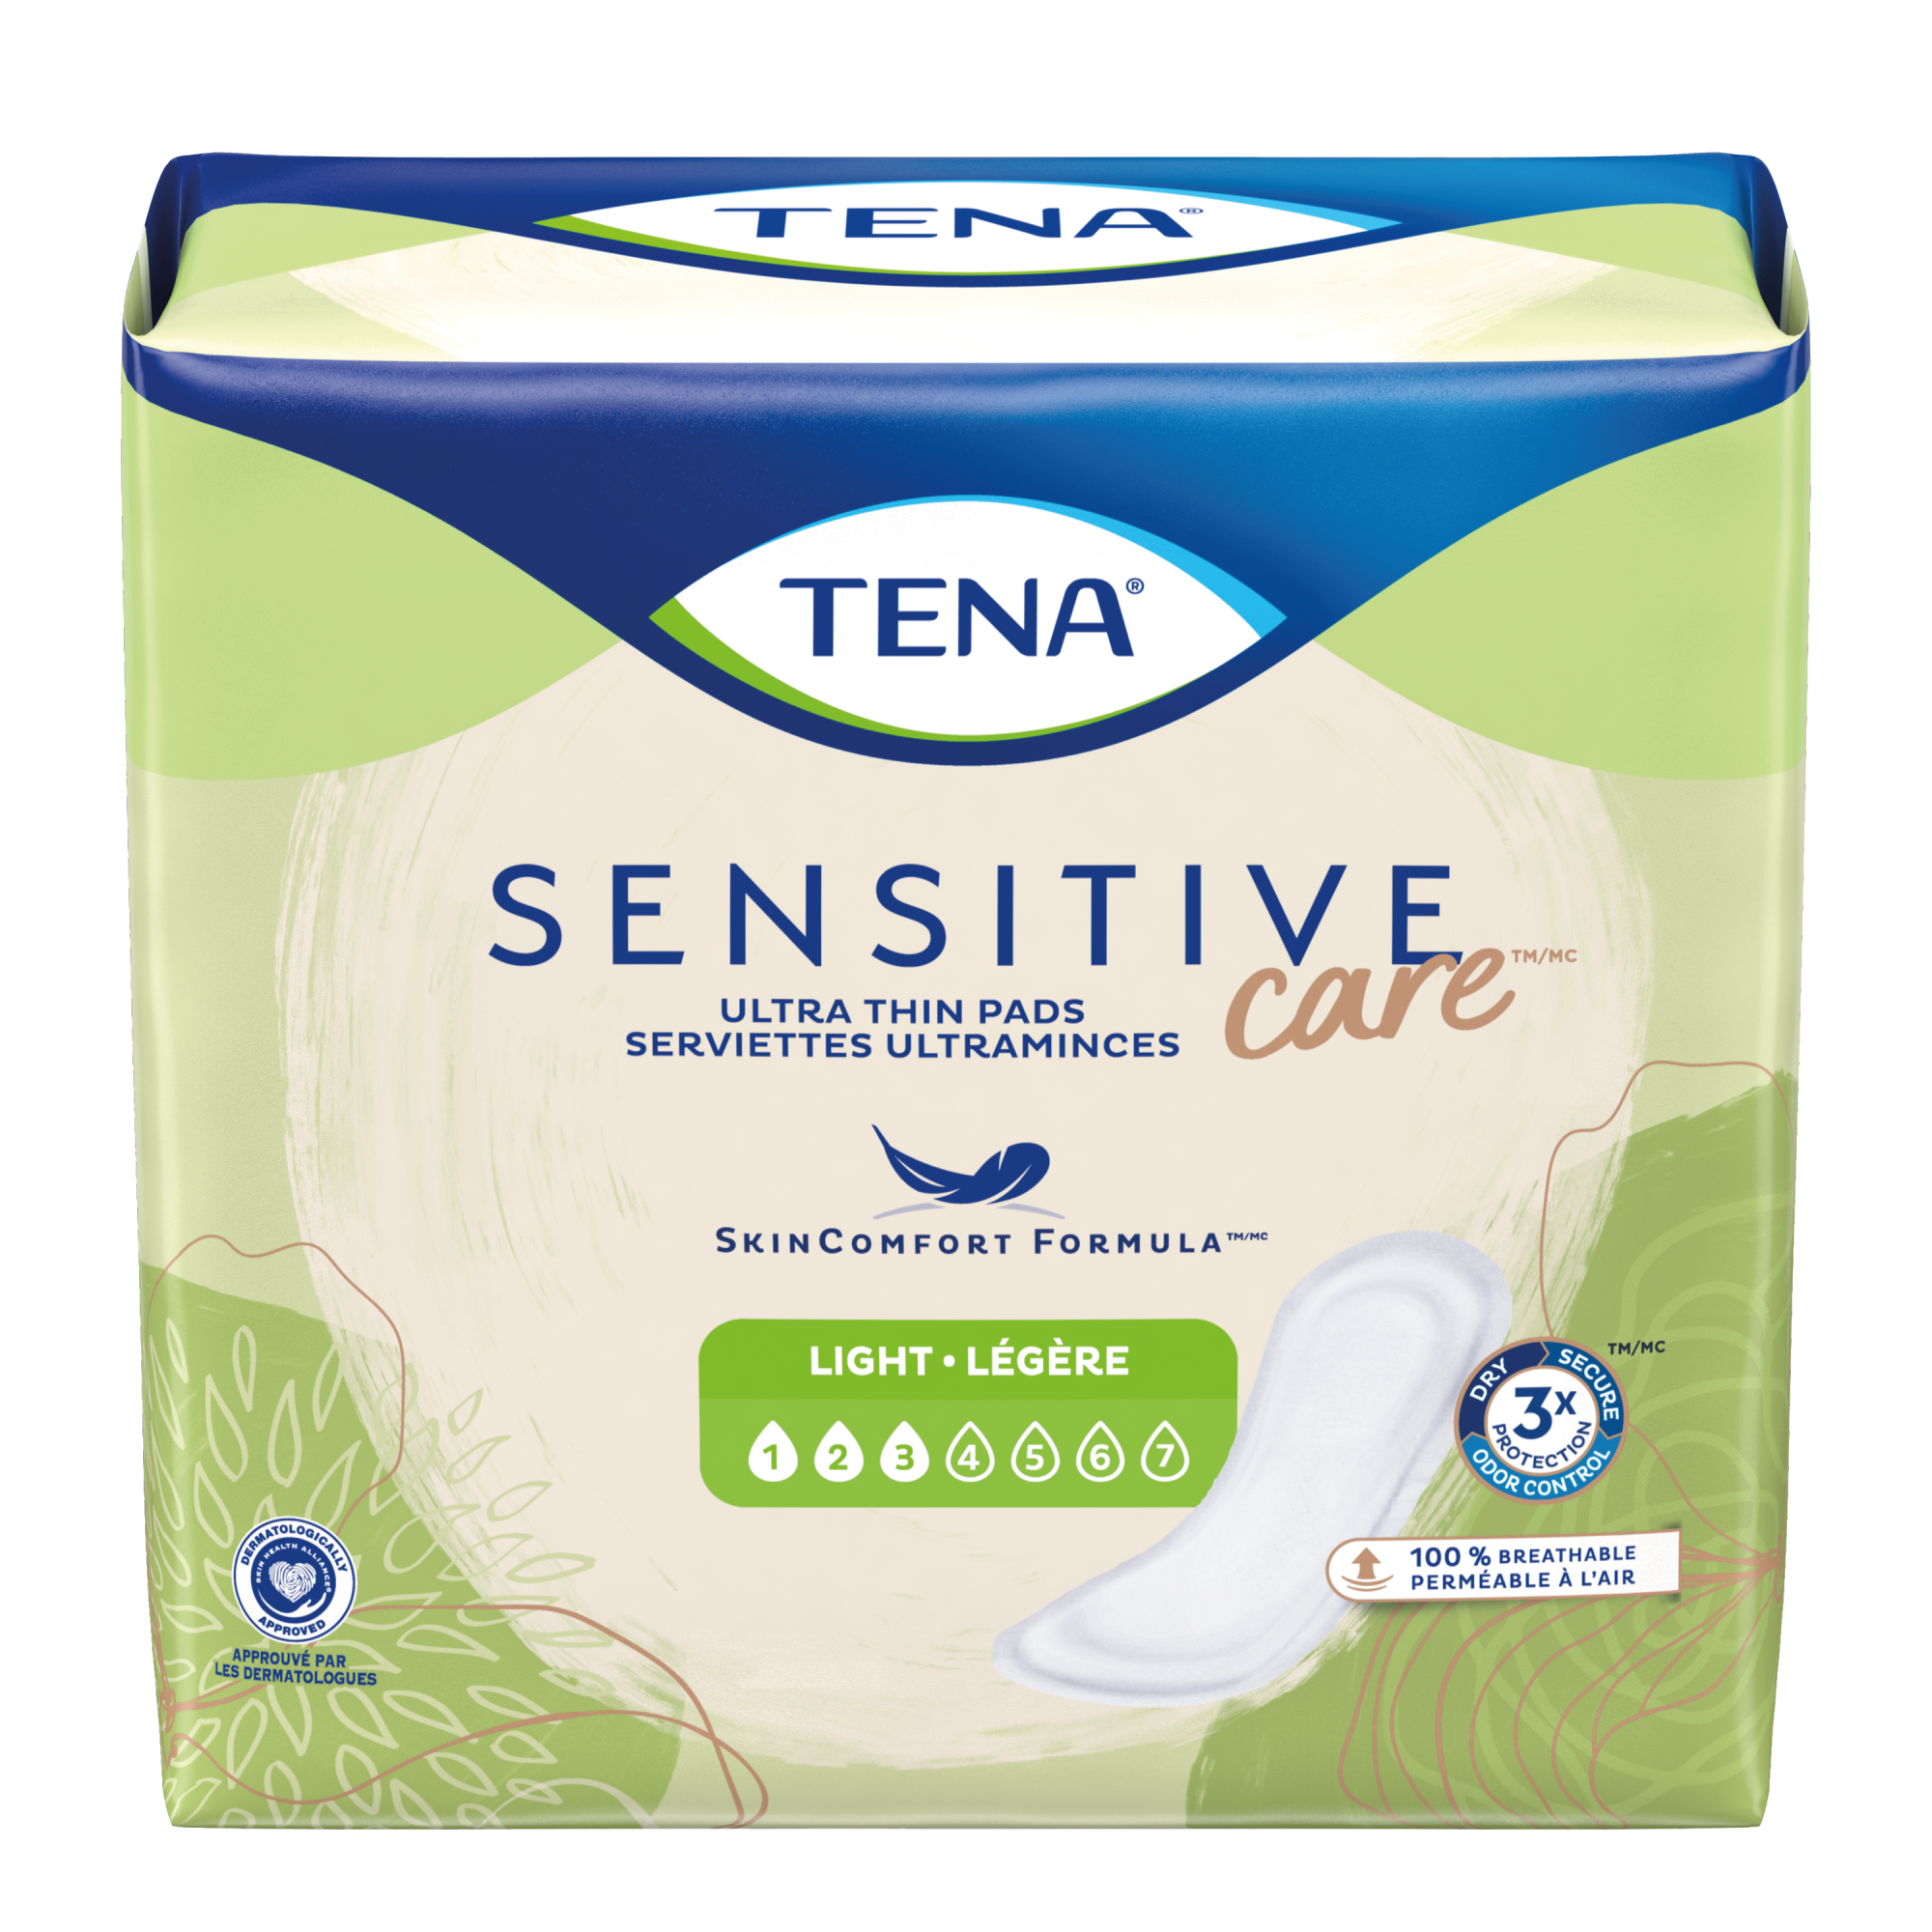 Night Super Maximum Absorbent Pads: Incontinence Pads For Women and Men 1  Pack and 2 Packs - TENA